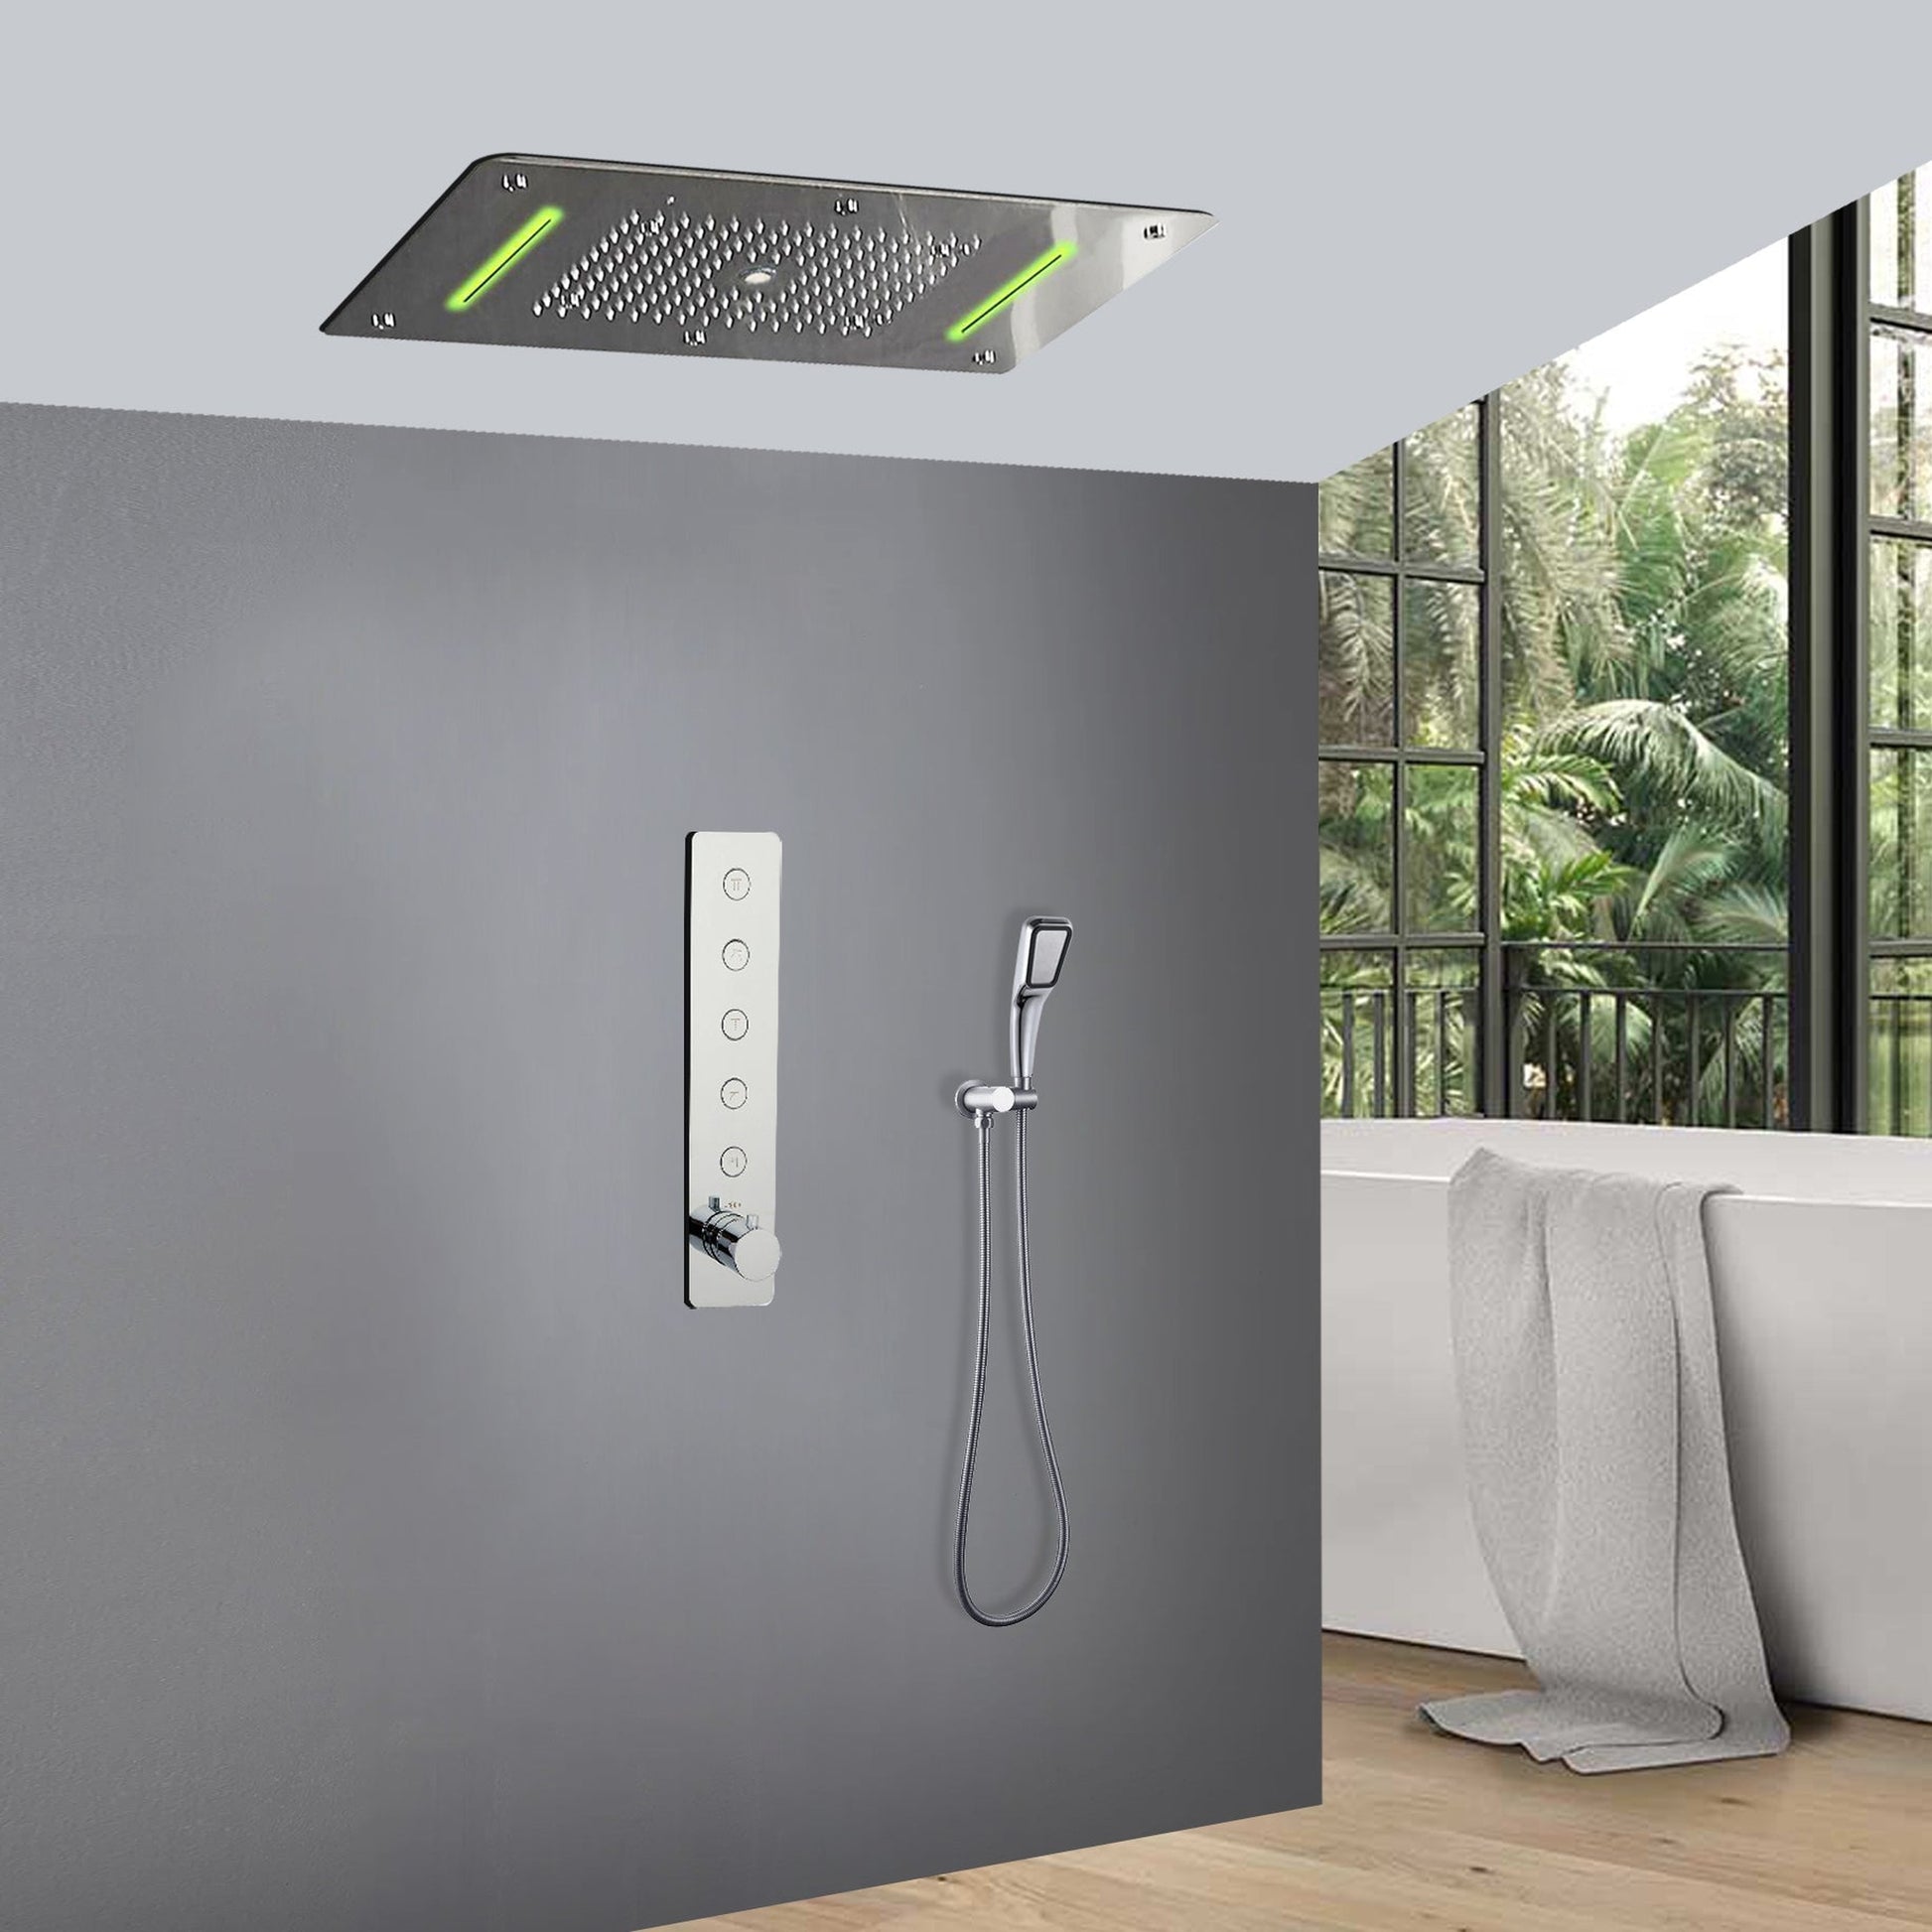 Fontana Andria Chrome Recessed Ceiling Mounted Thermostatic LED Rainfall Waterfall Mist Shower System With Hand Shower and Vertical Valve